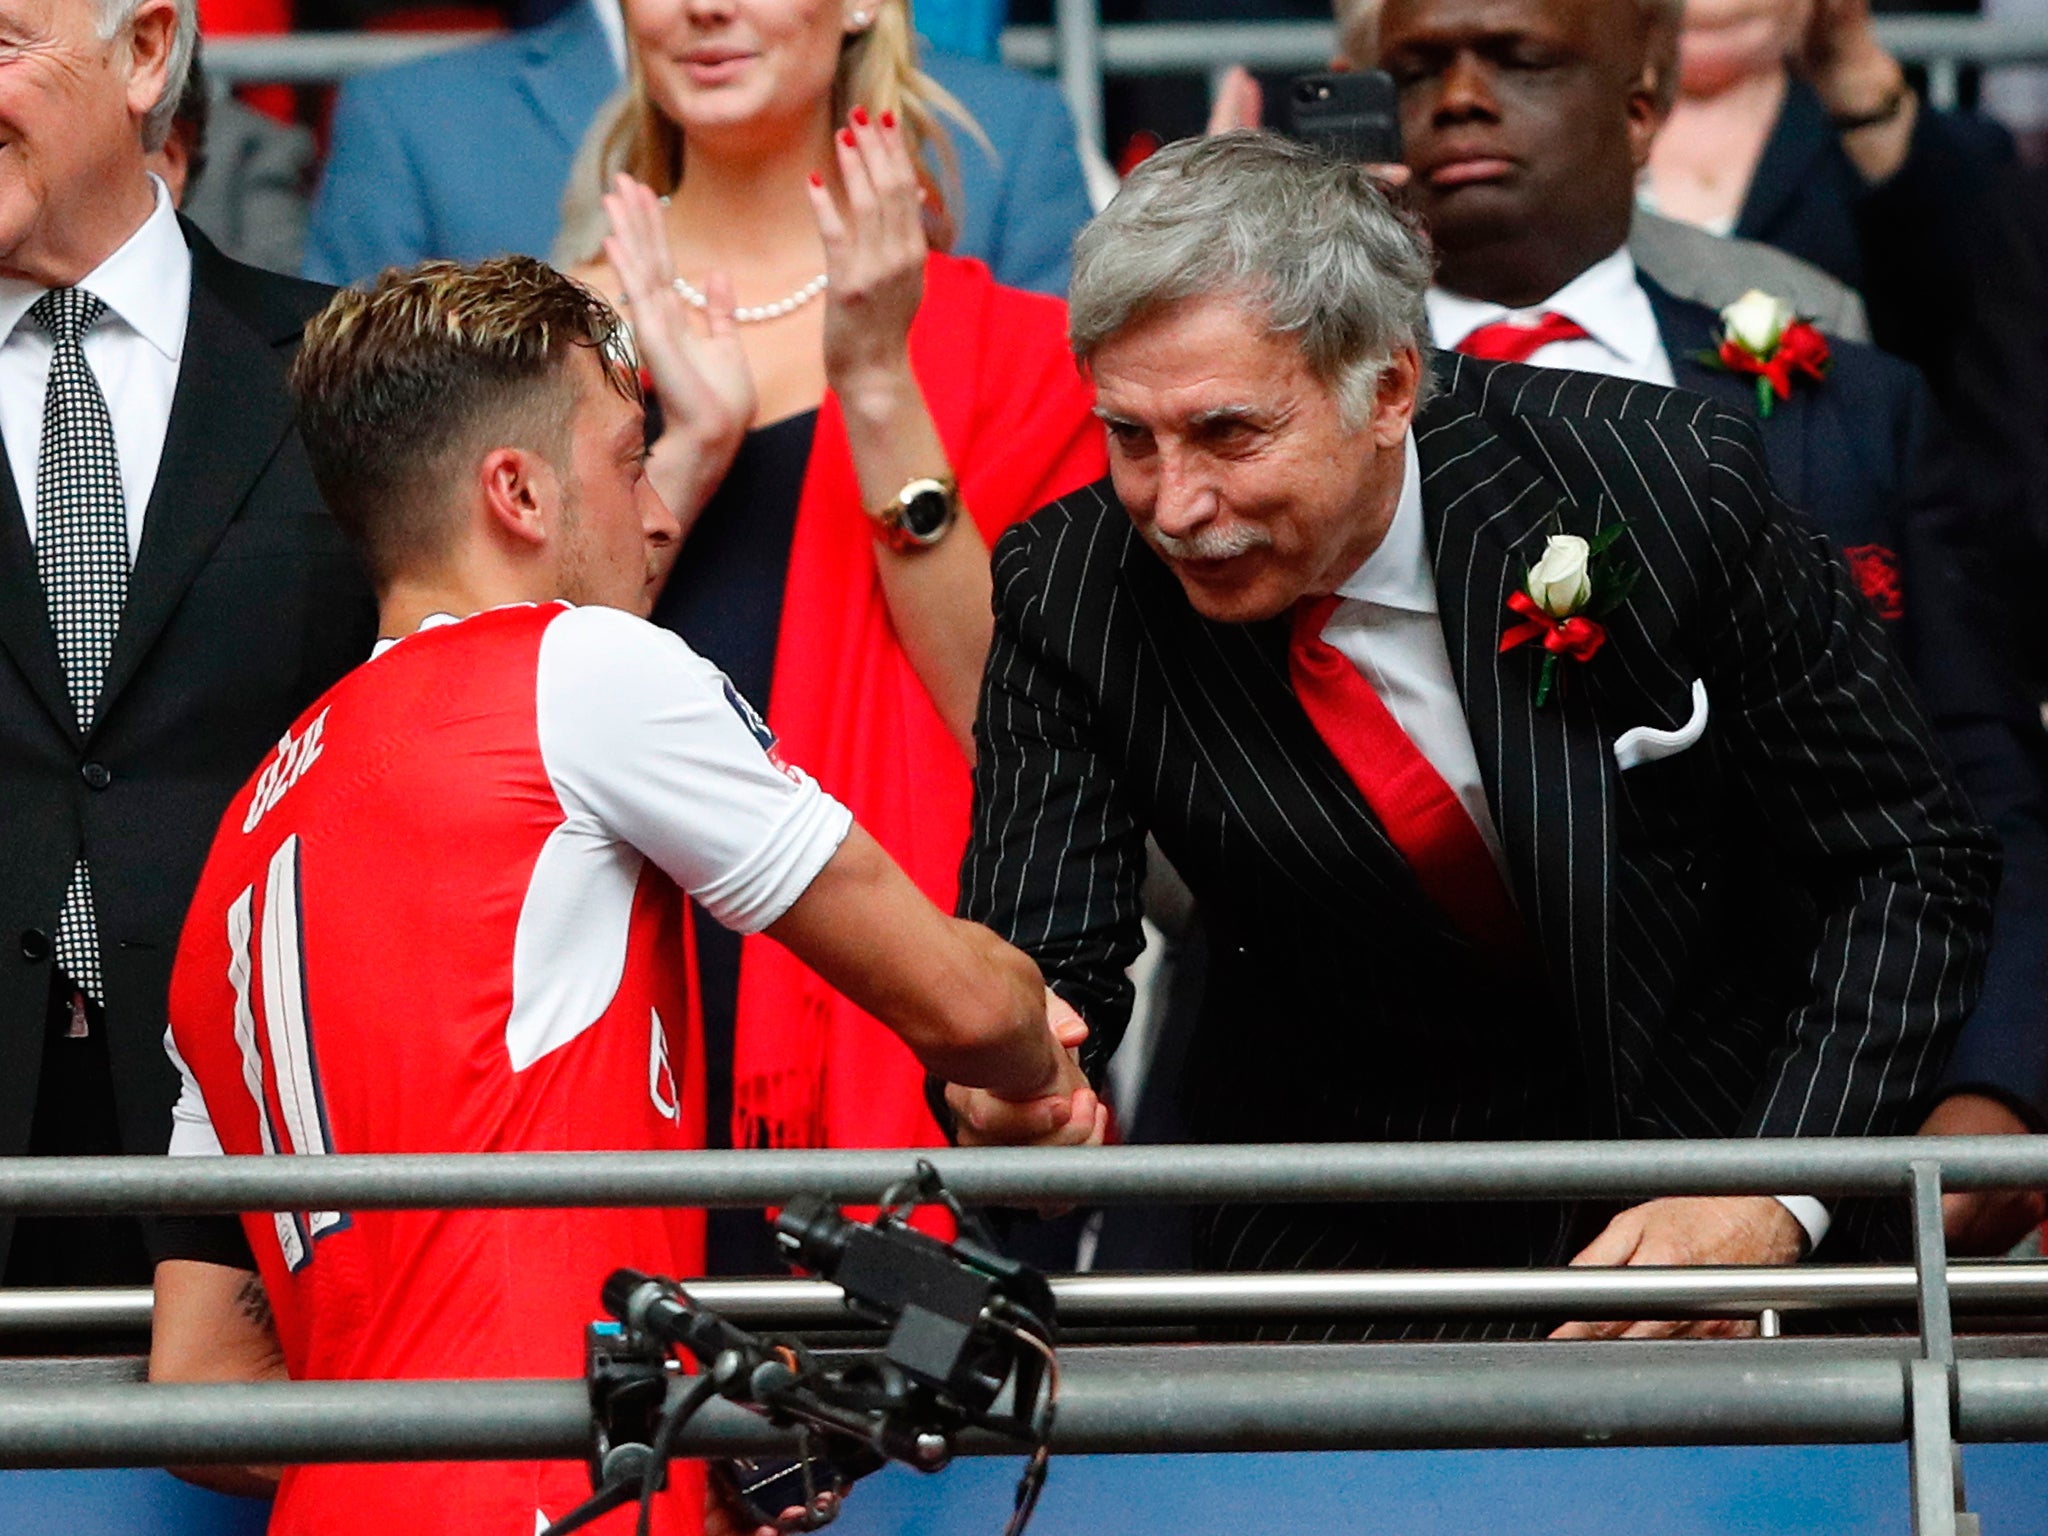 Arsenal's Stan Kroenke has faced a fan backlash since buying a majority share of the club